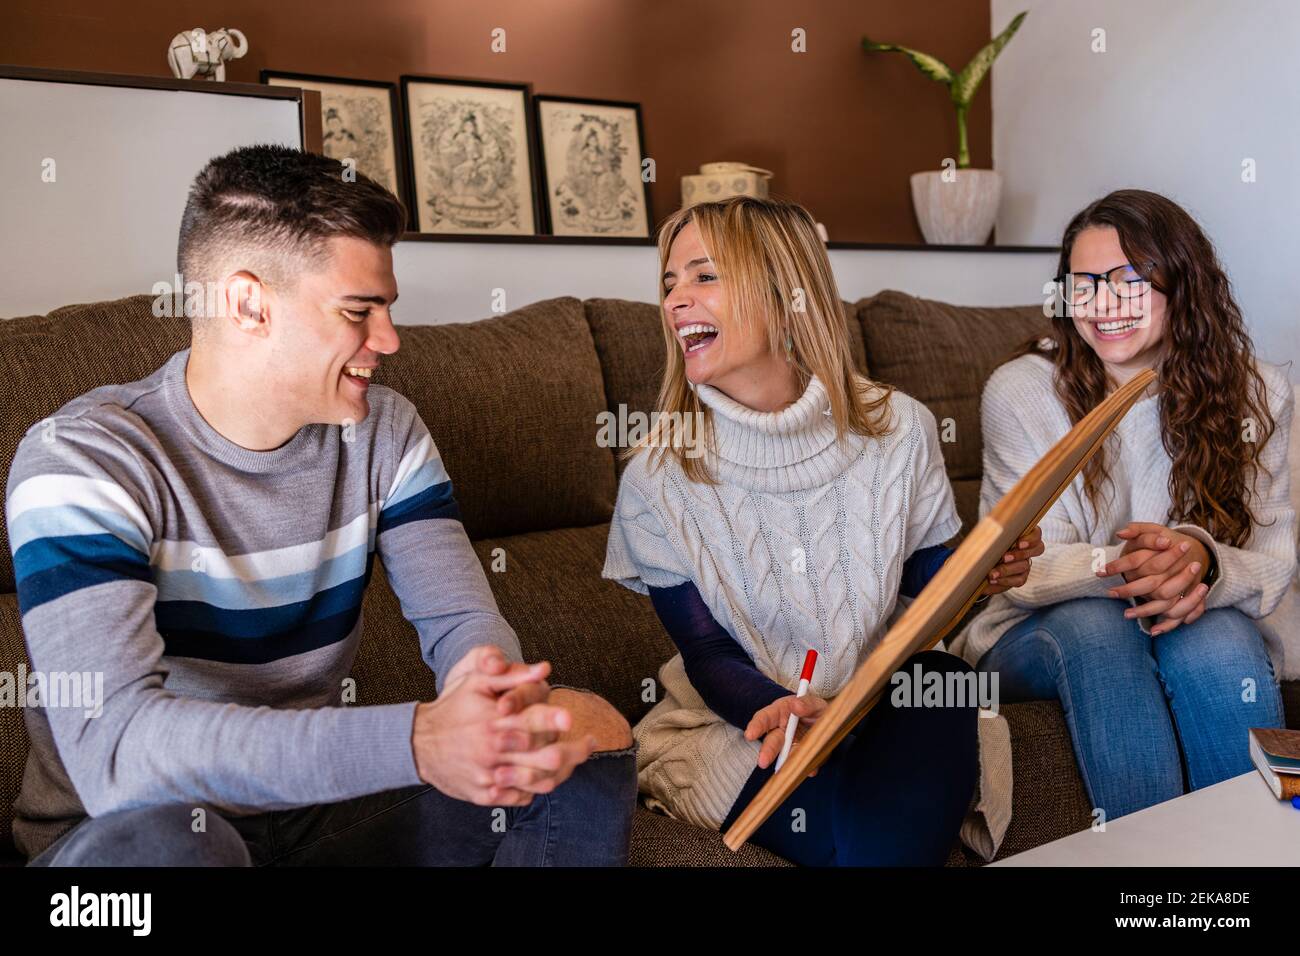 Female counselor with young patients laughing during session at work place Stock Photo